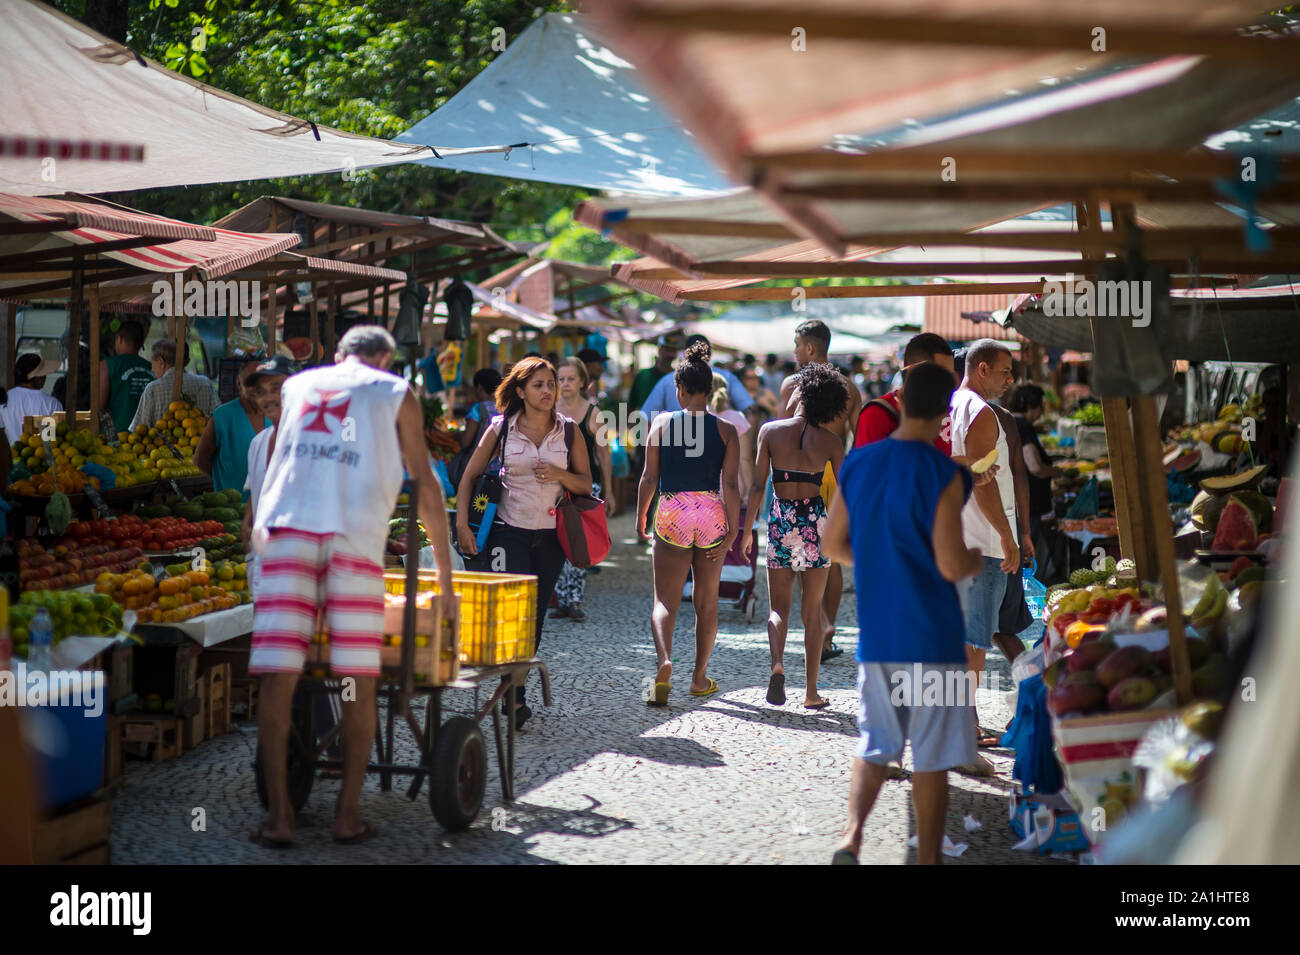 RIO DE JANEIRO - JANUARY 20, 2018: Customers browse the weekly farmer's market for tropical fruits and vegetables in General Osorio Plaza in Ipanema. Stock Photo